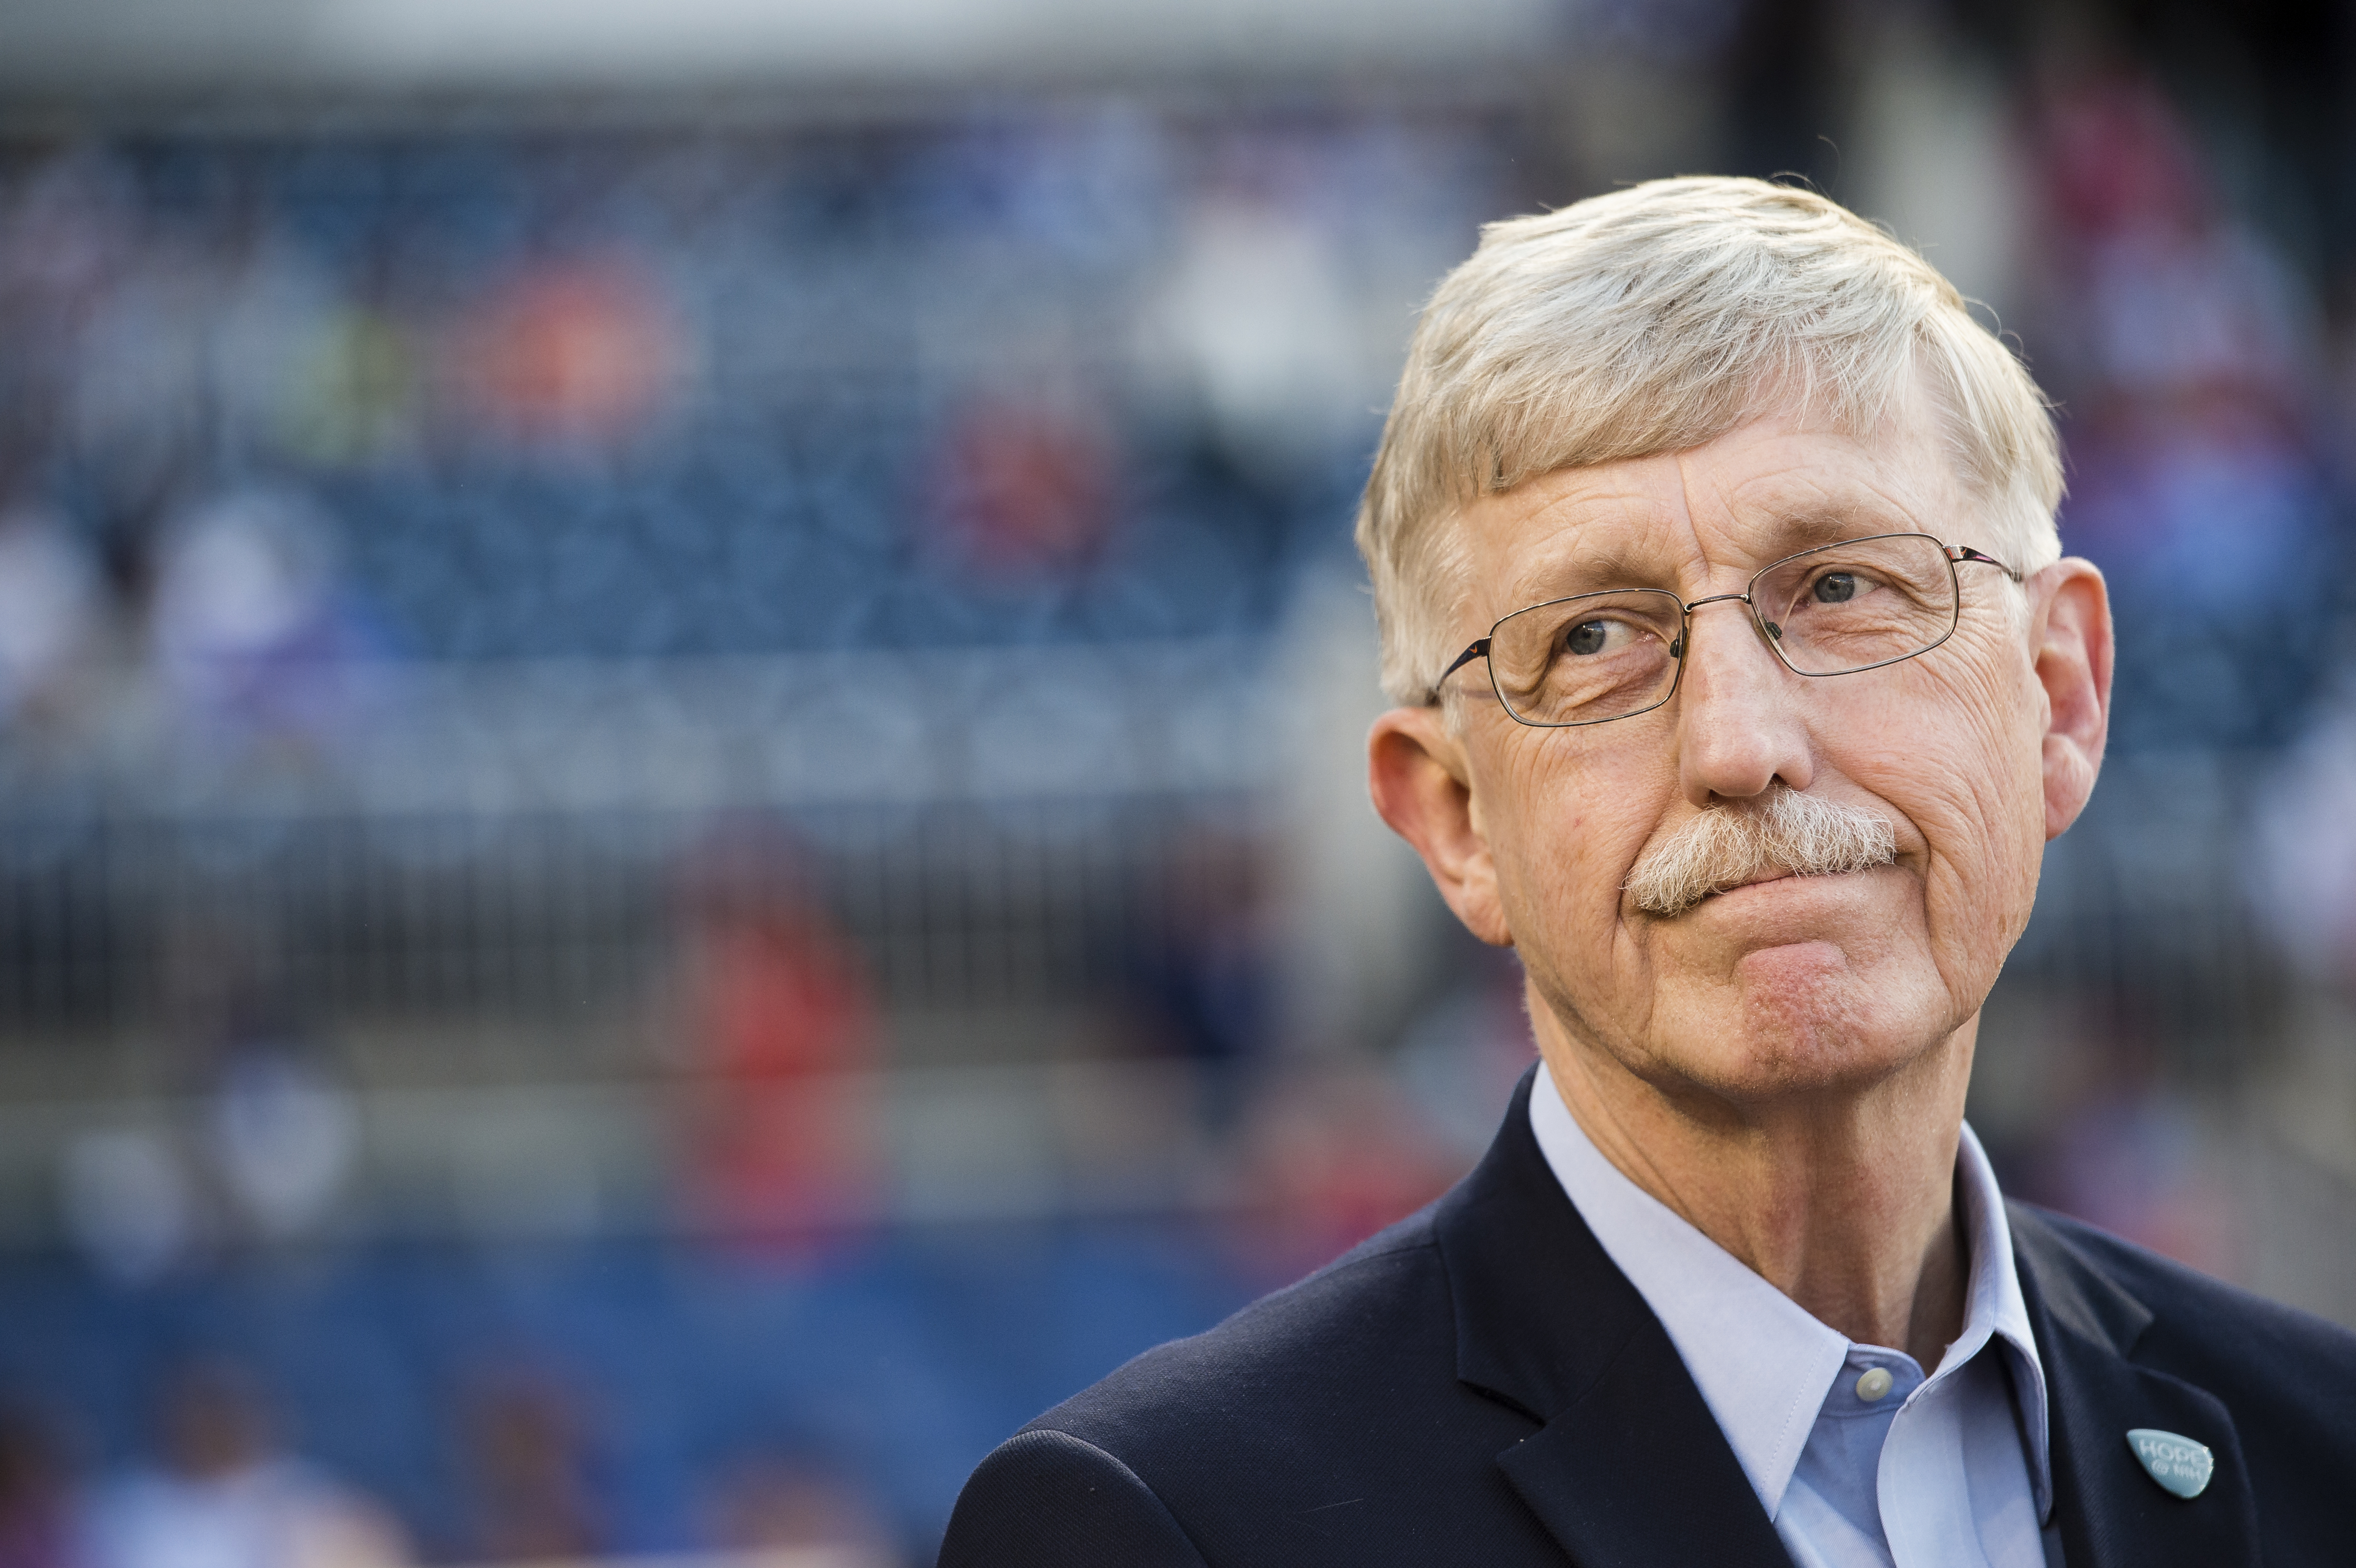 Dr. Francis Collins at a game between the New York Mets and Washington Nationals at Nationals Park in Washington on May 24, 2016.